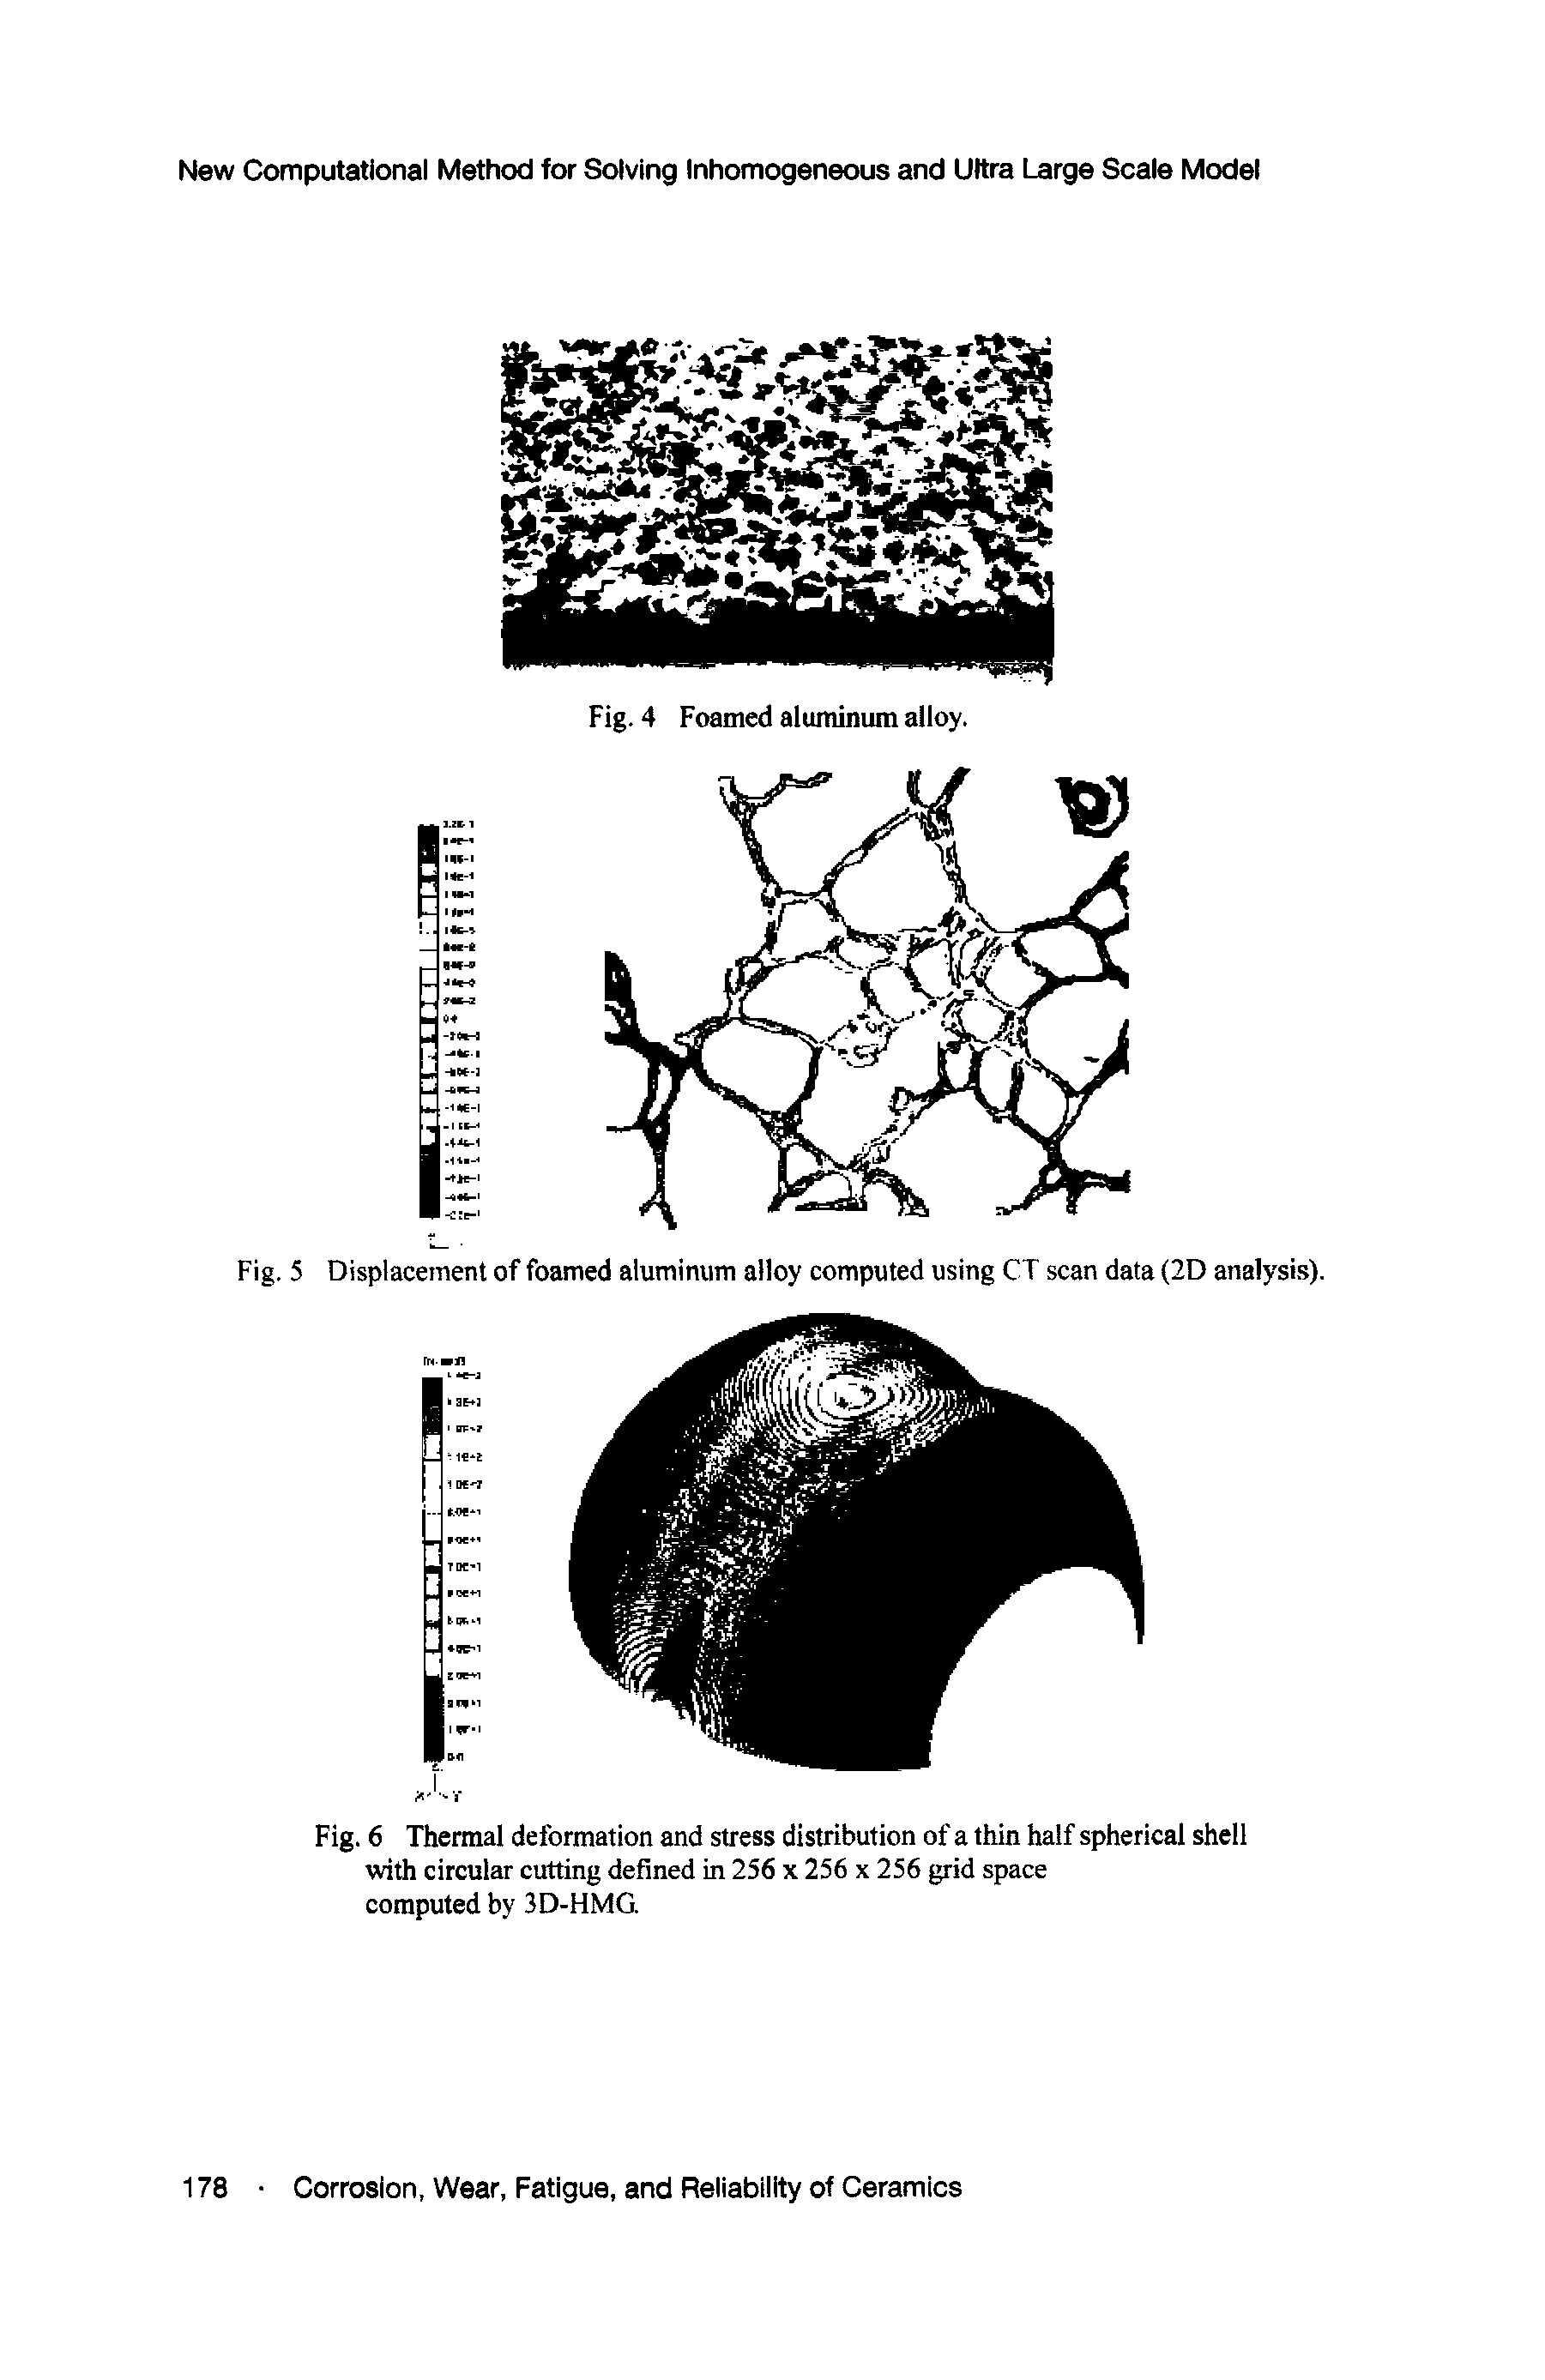 Fig. 6 Thermal deformation and stress distribution of a thin half spherical shell with circular cutting defined in 256 x 256 x 256 grid space computed by 3D-HMG...